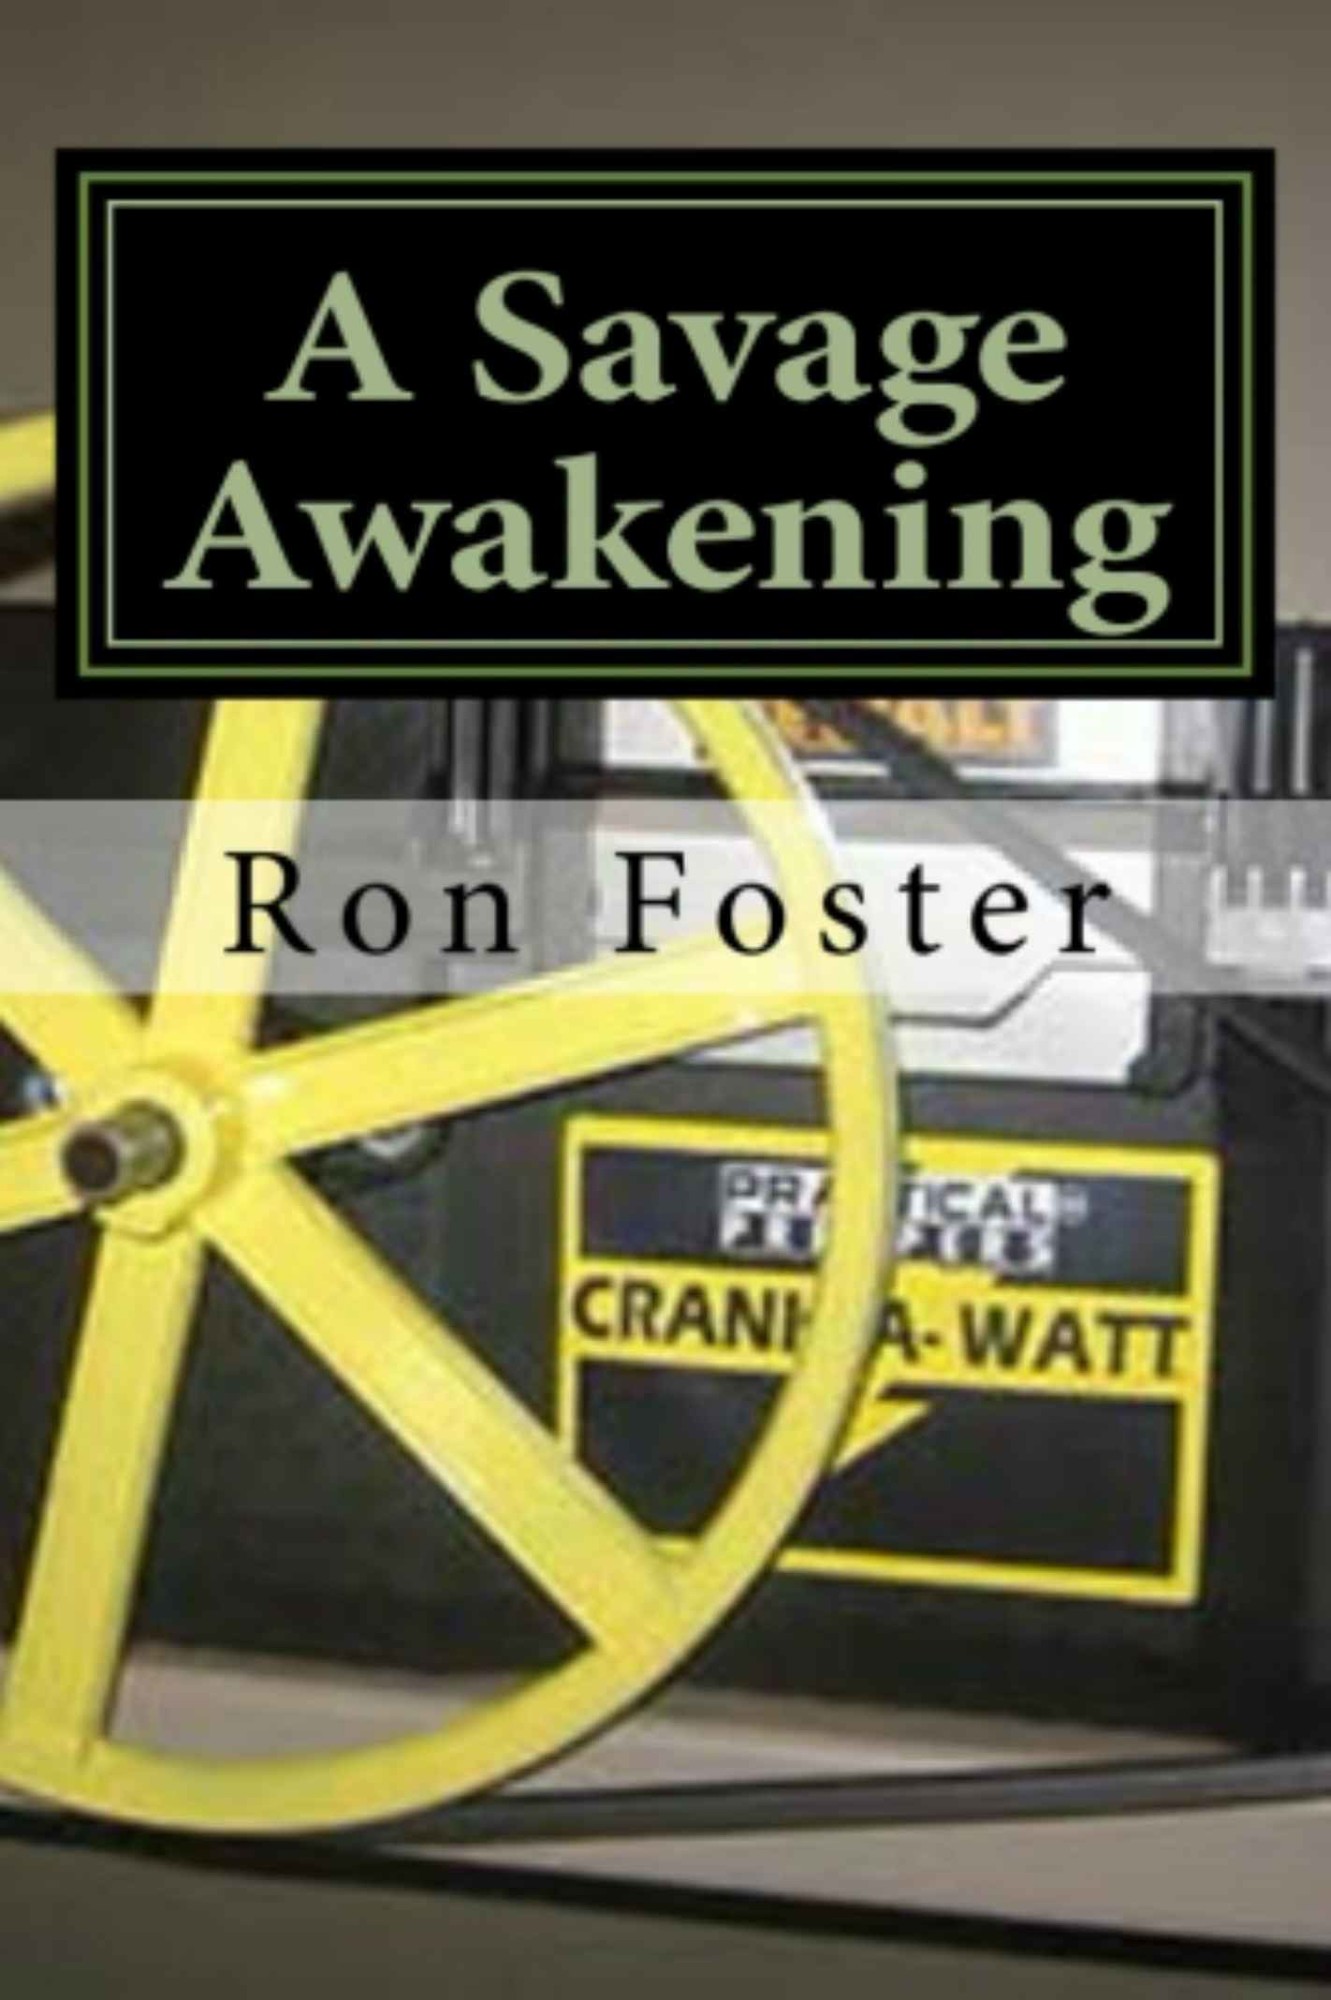 The Savage Awakening (A preppers Perspective) by Ron Foster